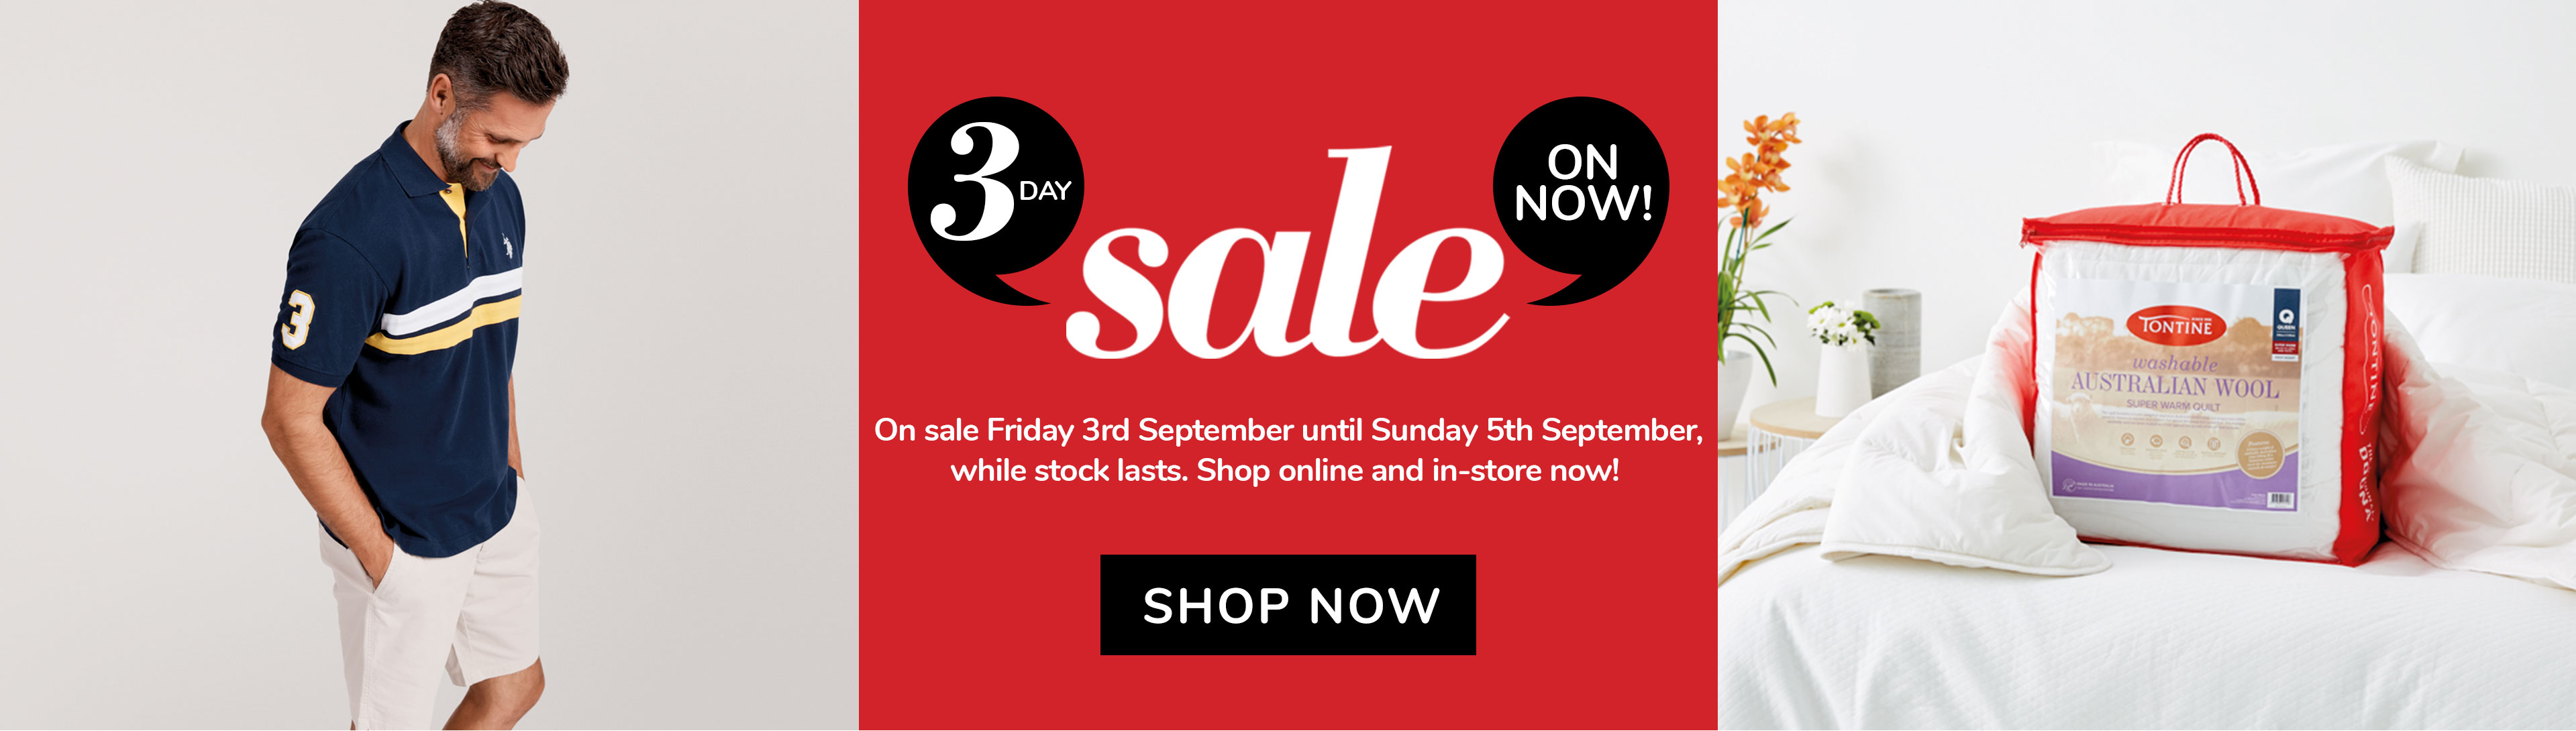 3 Day sale  - Up to 50% OFF on clothing, cookware & more